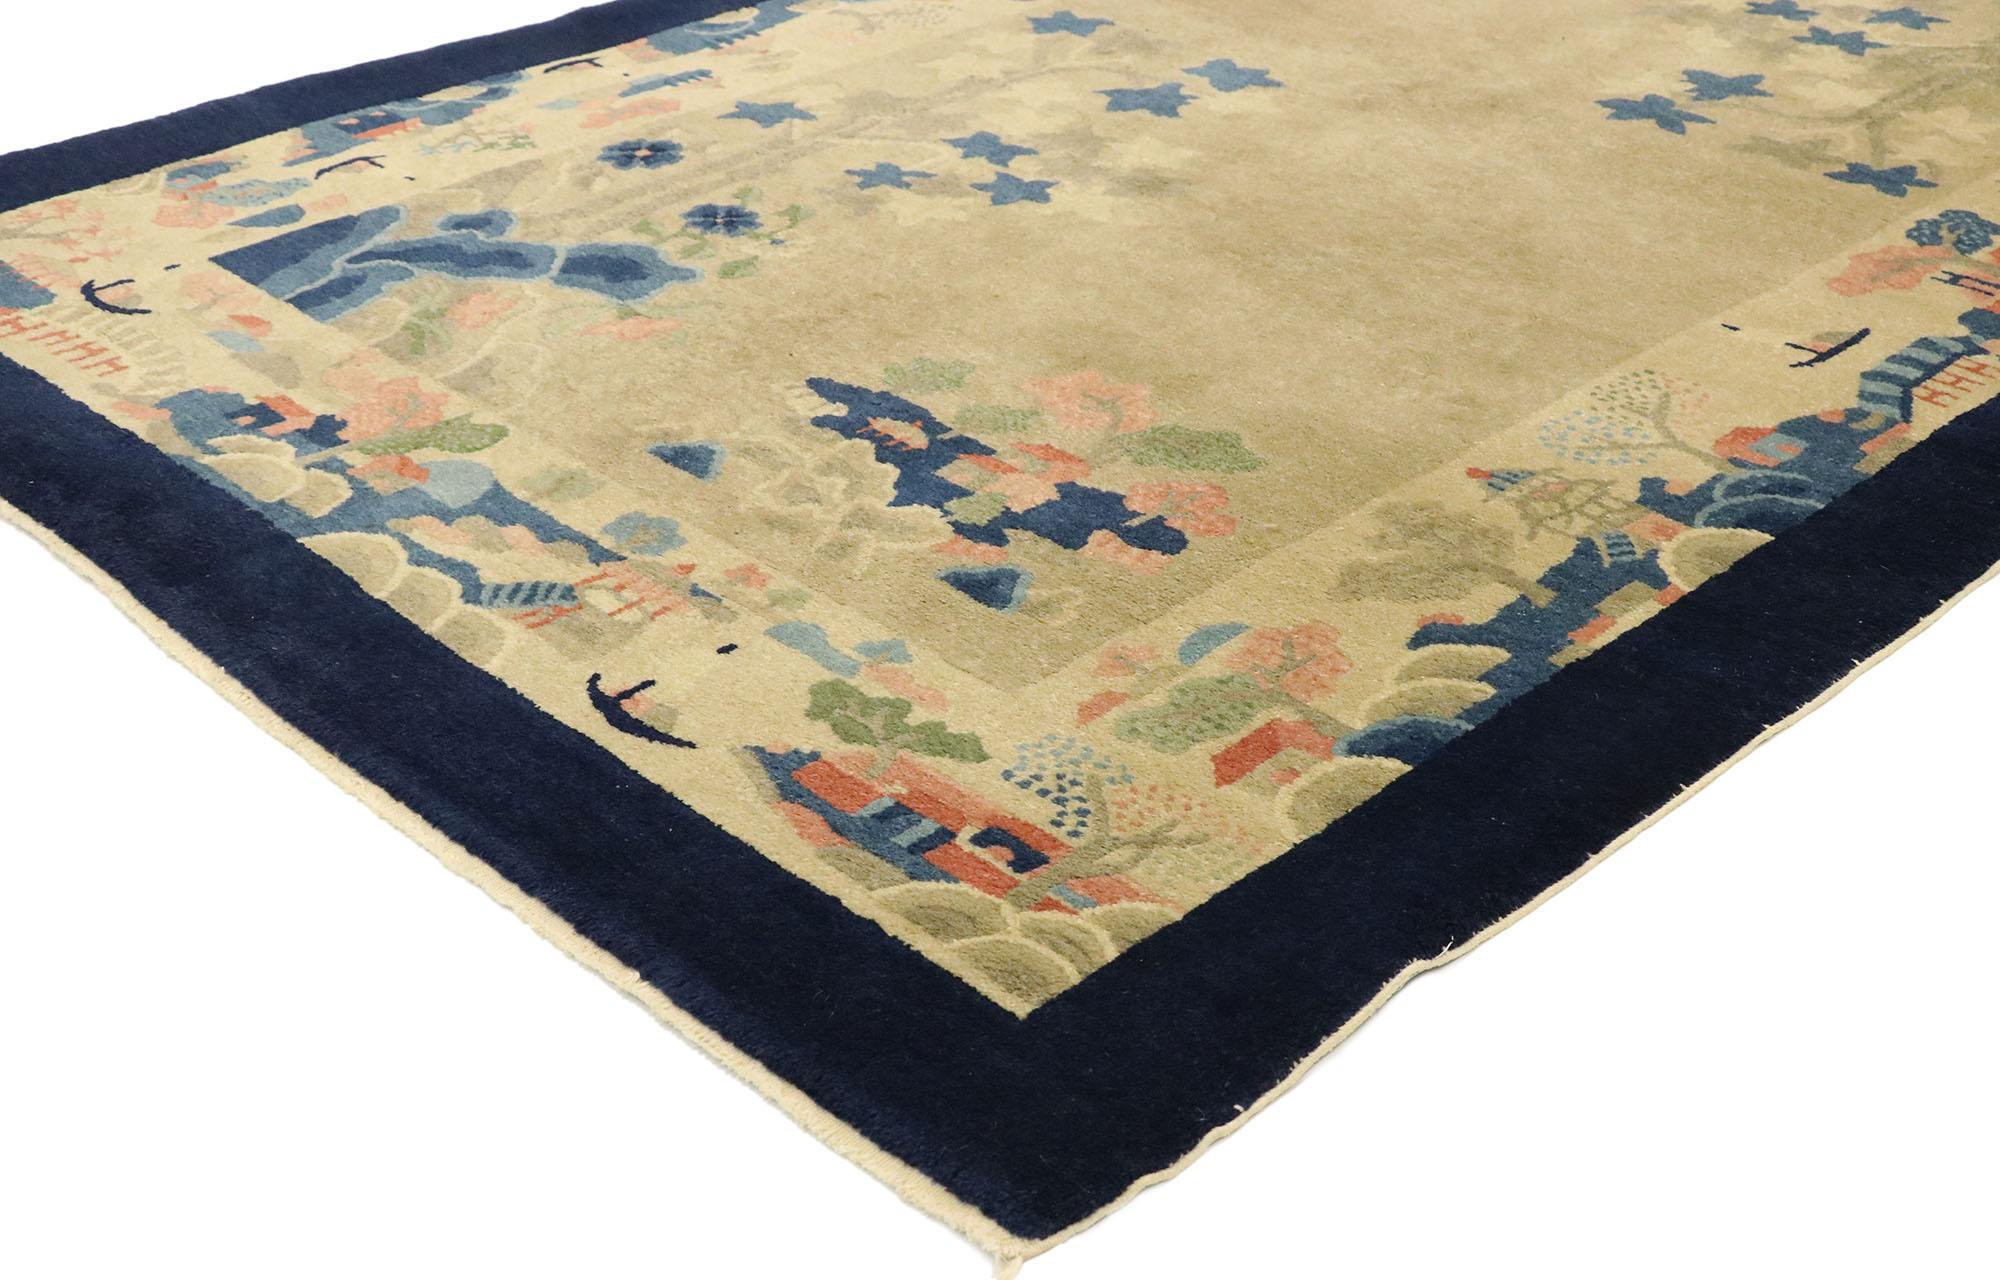 77448 Antique Chinese Art Deco Pictorial rug with landscape scenes and Chinoiserie style. This hand knotted wool antique Chinese Art Deco rug features landscape scenes of fishing villages on the river. In the lower left corner and upper right corner